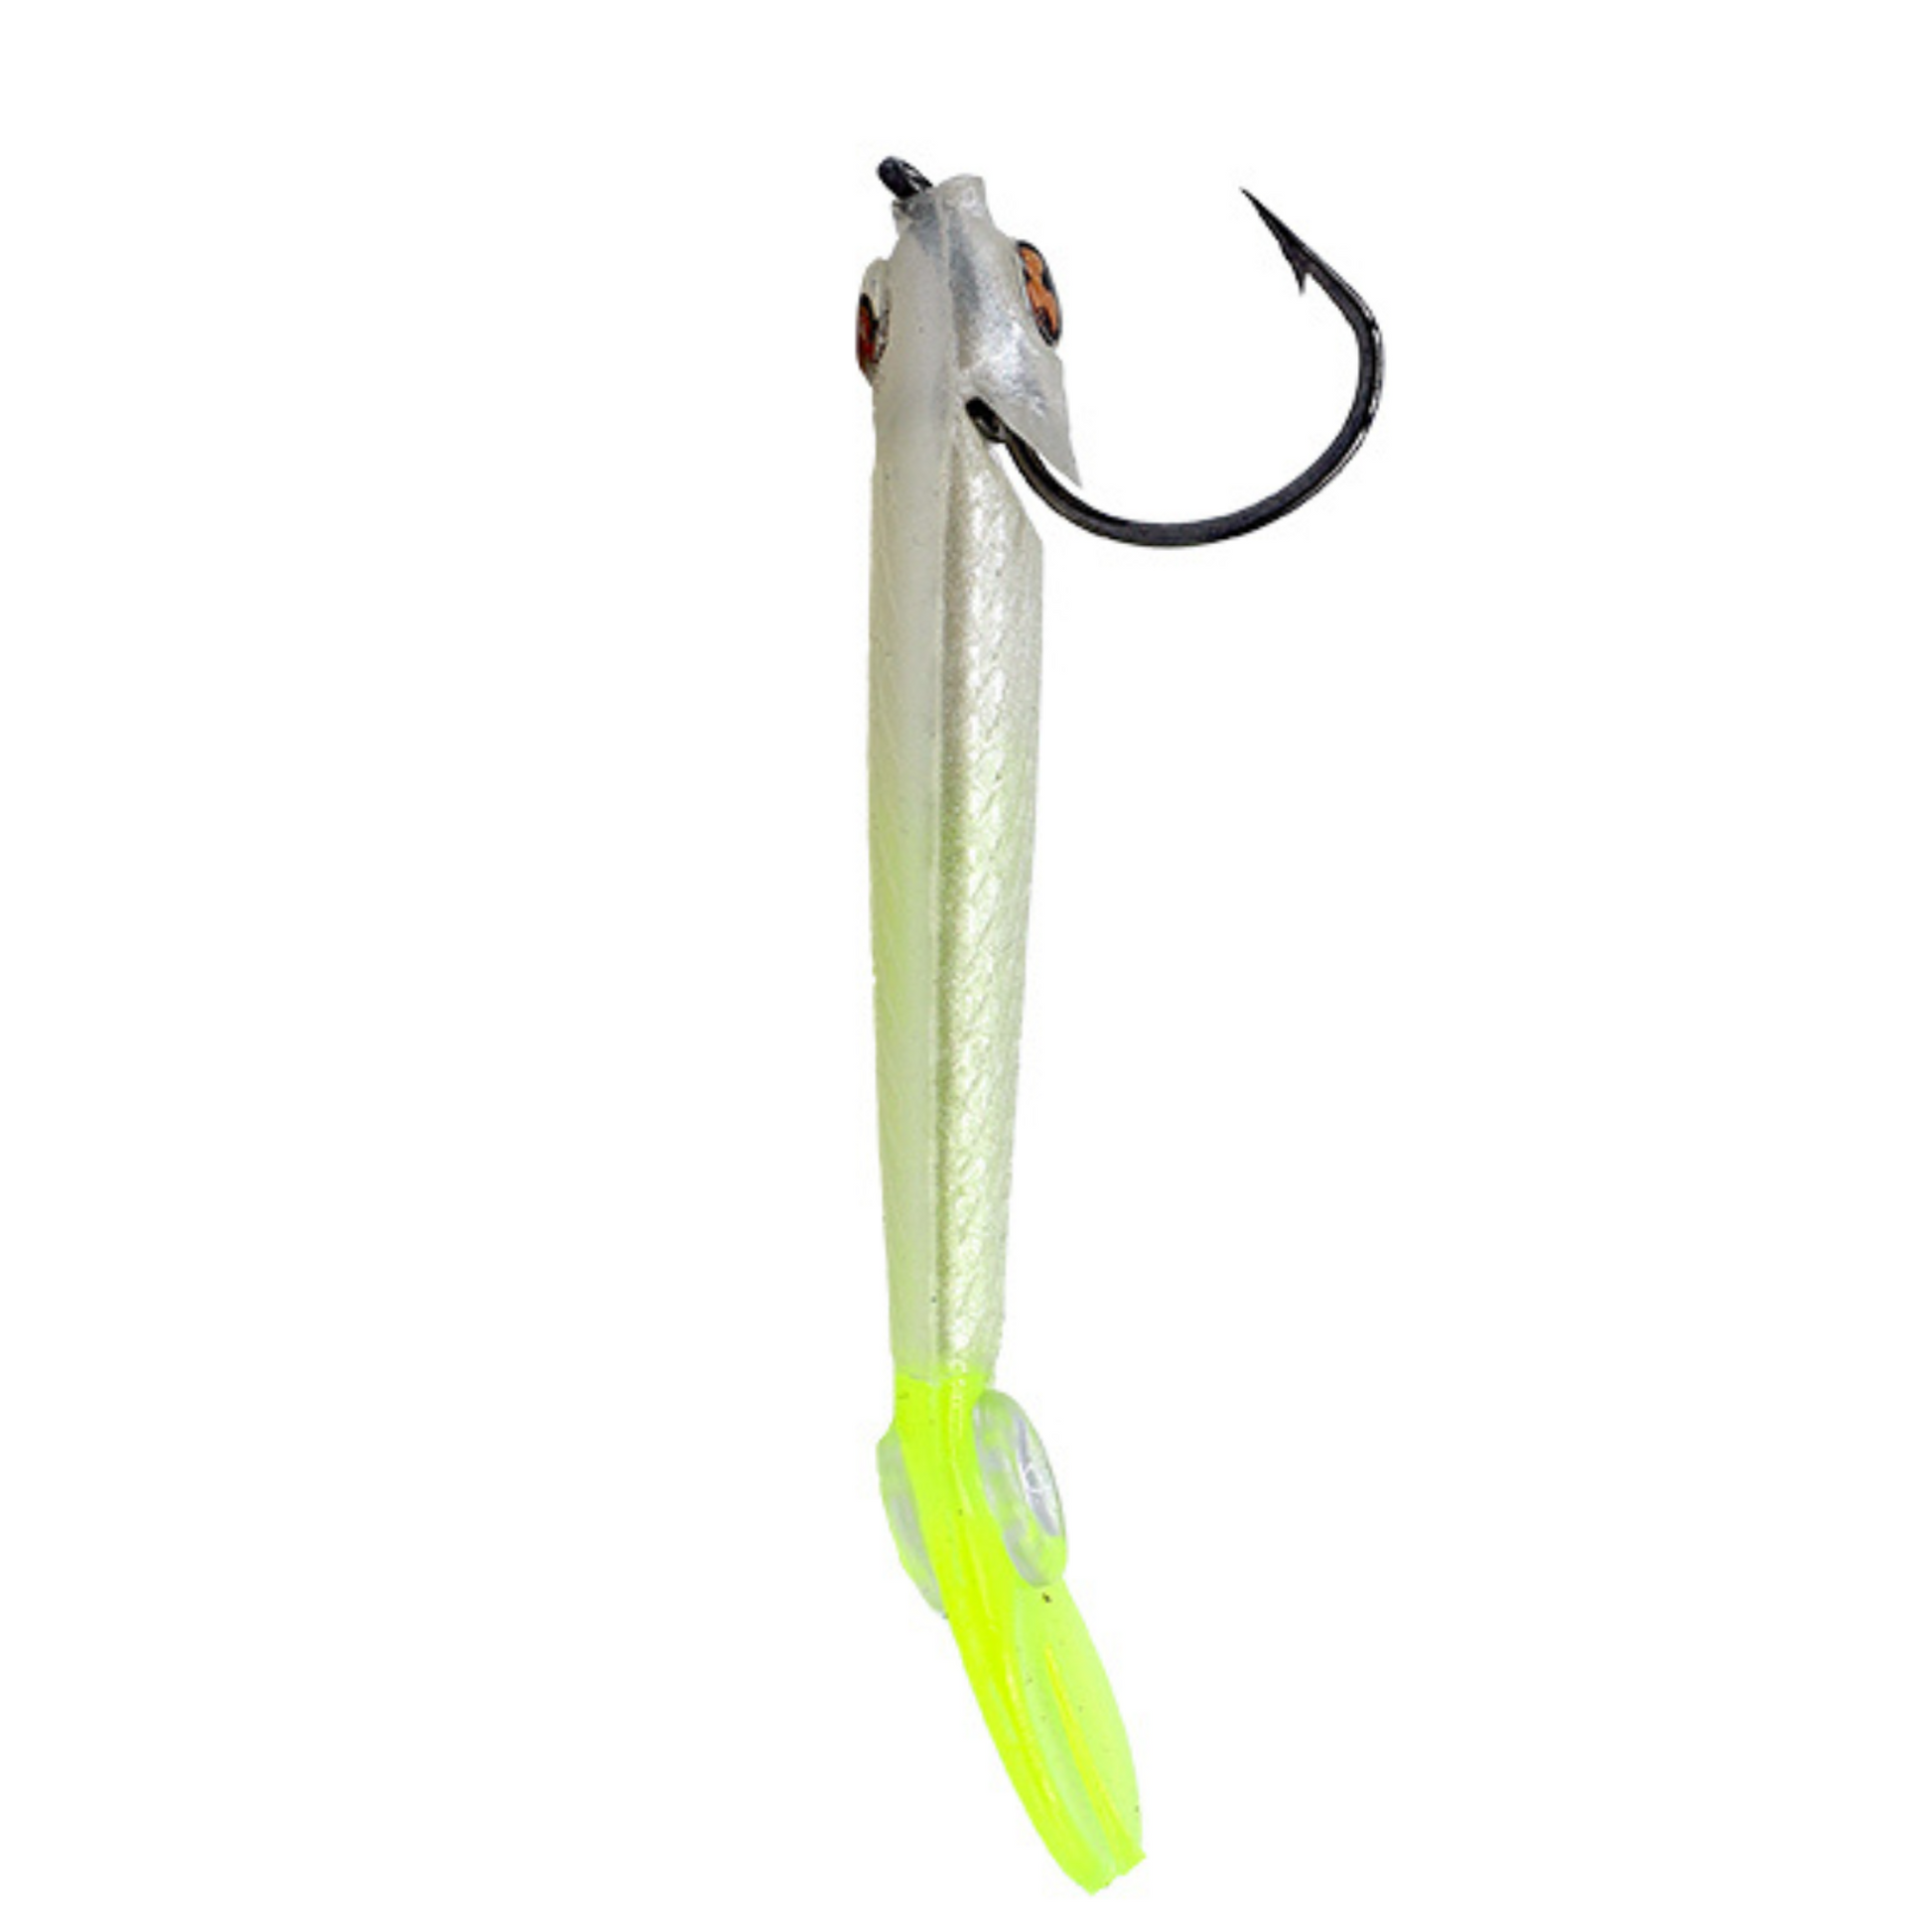 3.25 5pc. Recoil Baits - Pearl White w/ Chartreuse Tail – Lawless